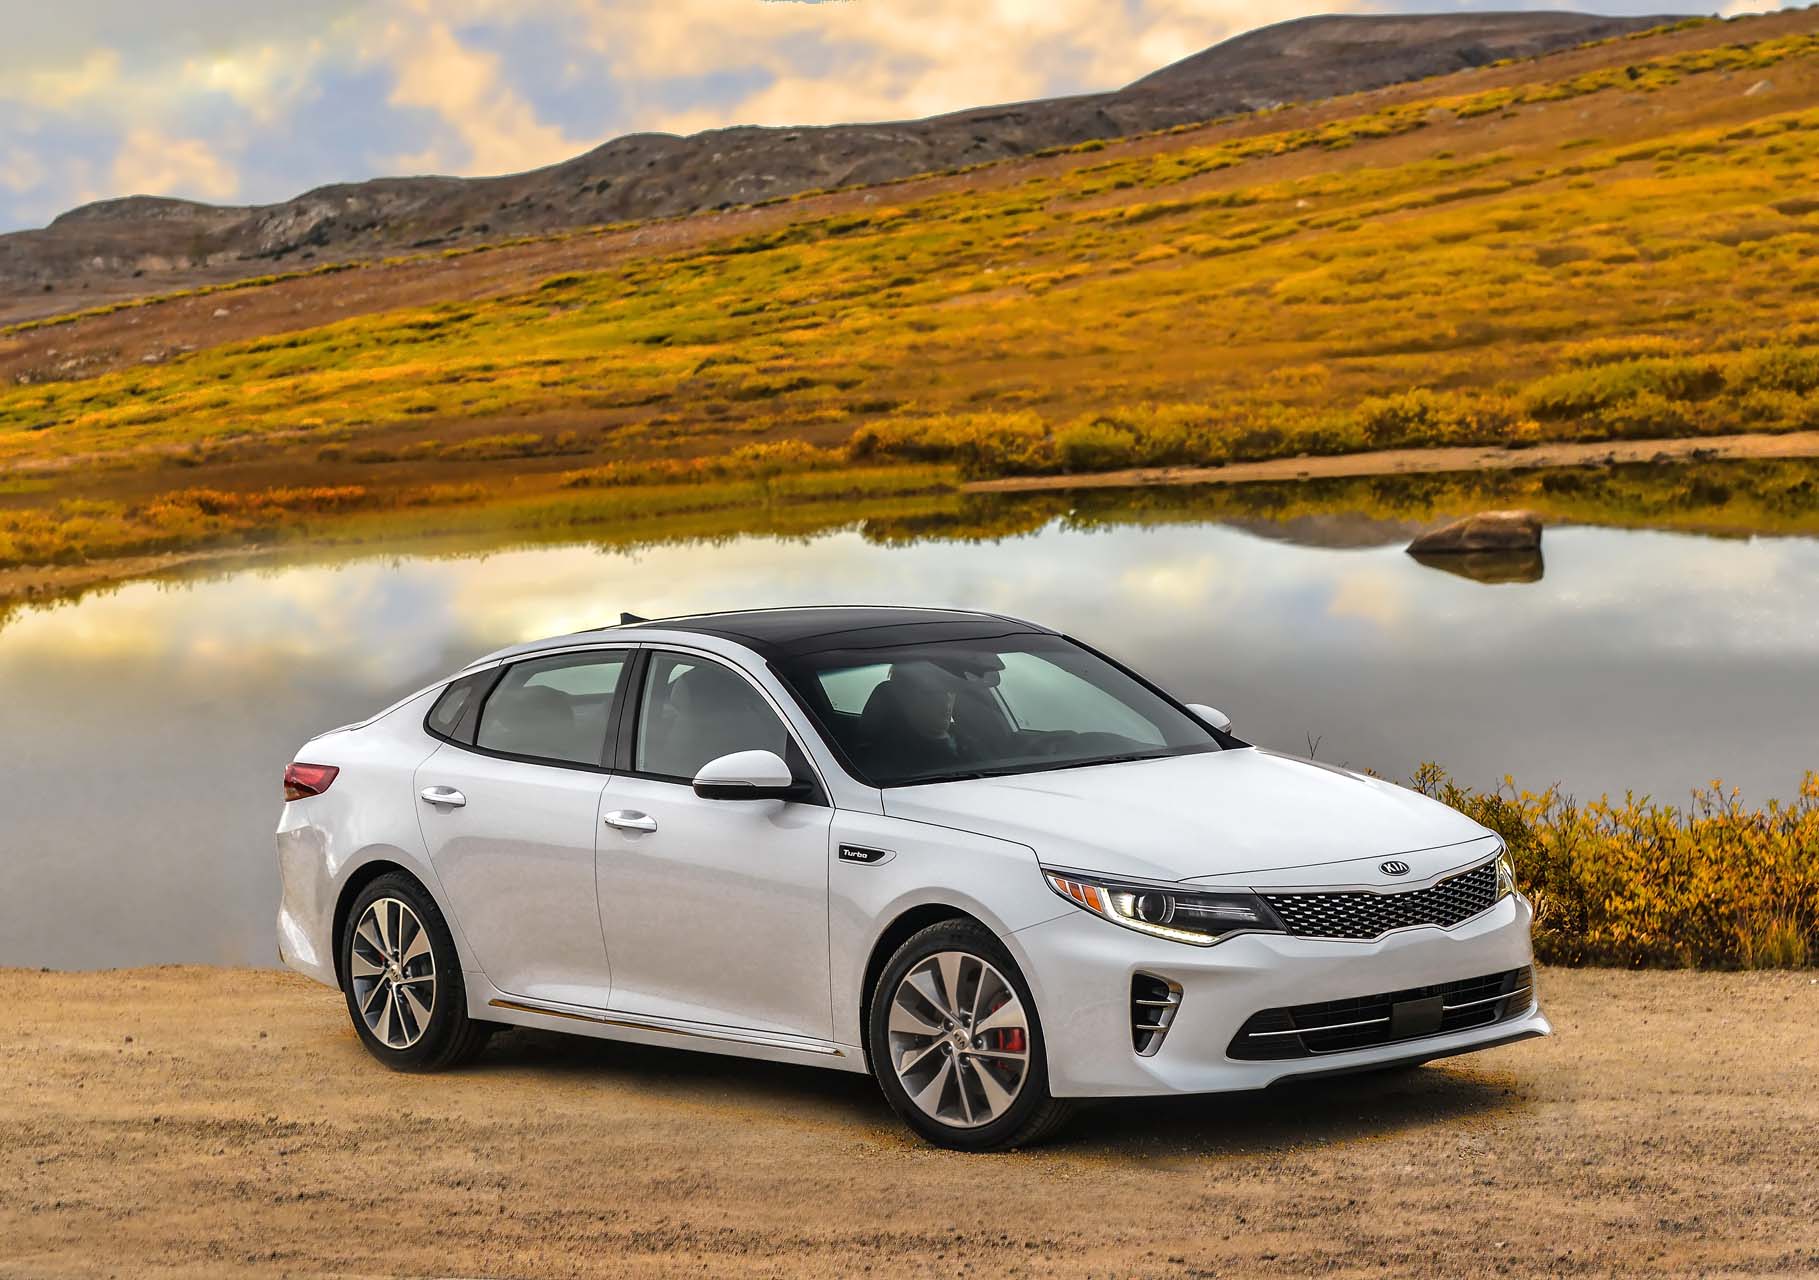 2018 Kia Optima Review, Ratings, Specs, Prices, and Photos - The Car Connection1819 x 1280